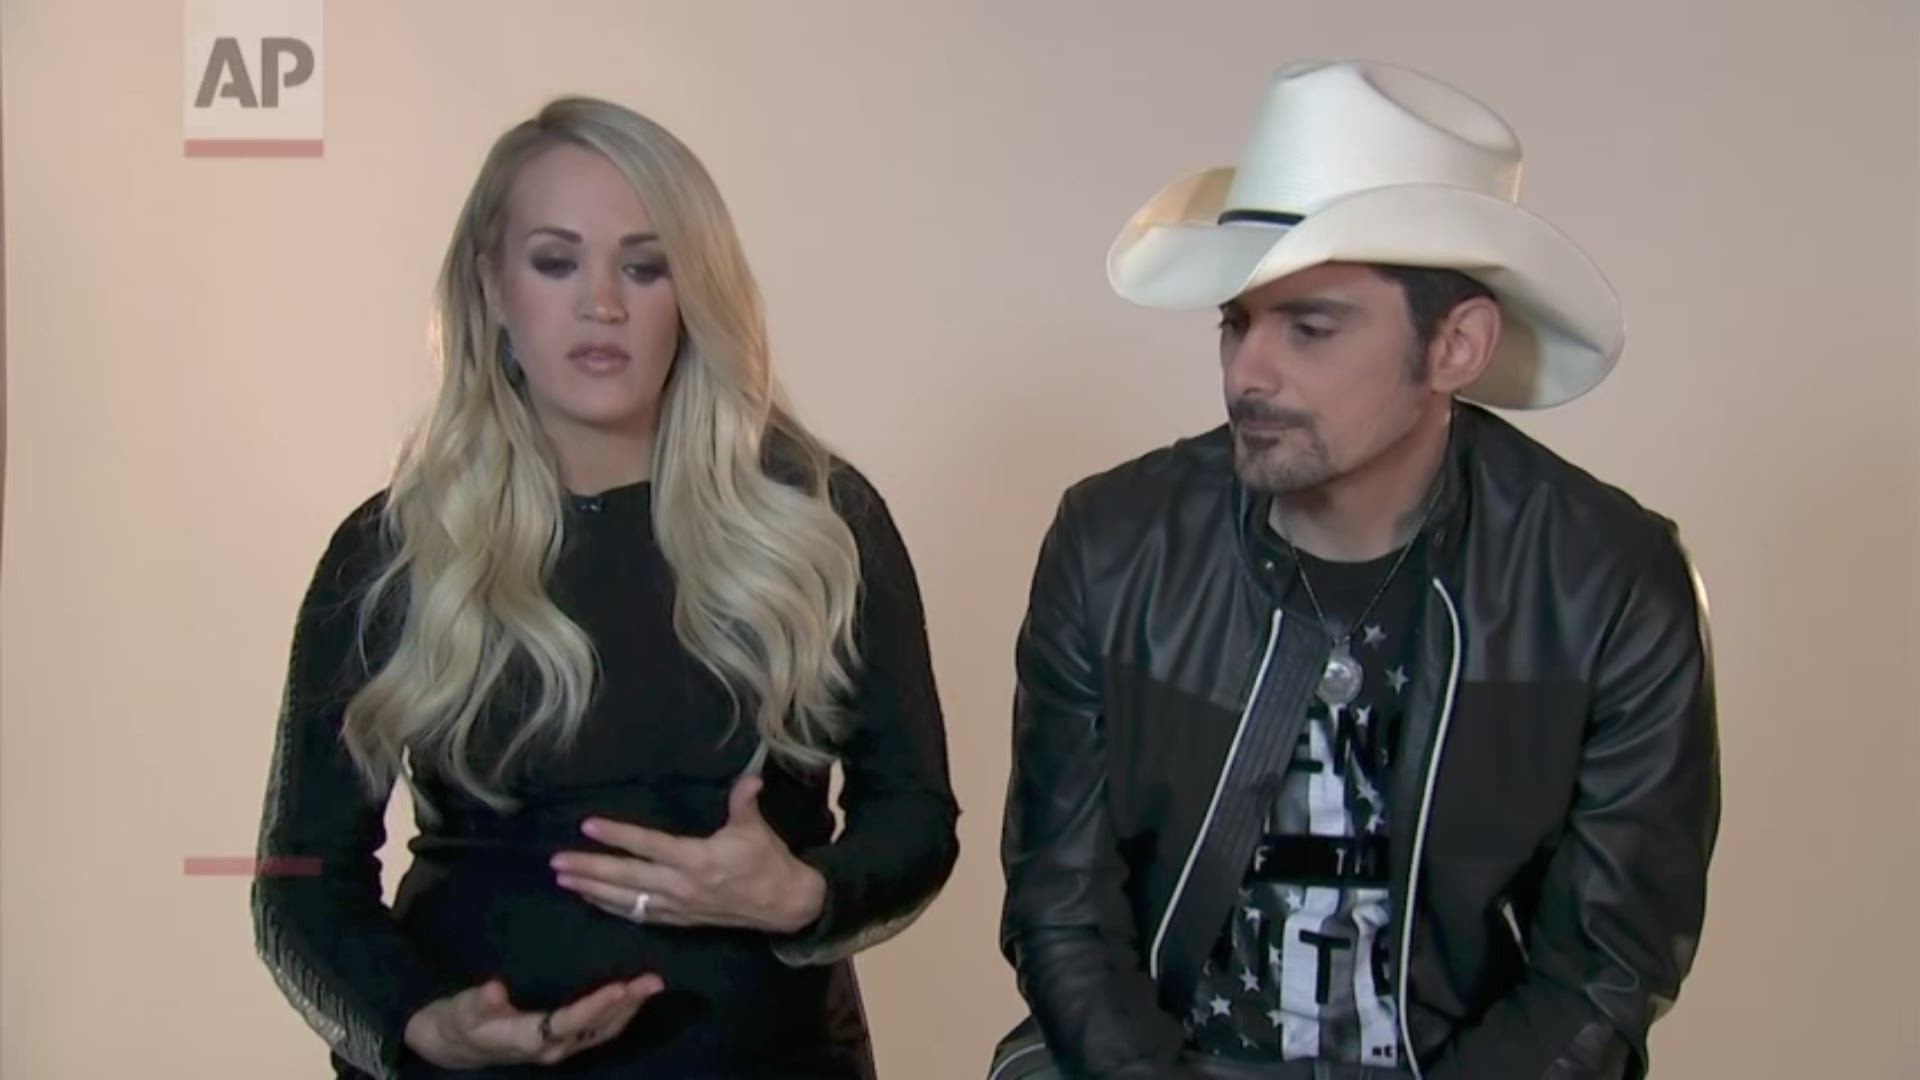 Carrie Underwood and Brad Paisley are returning for their 11th time to host the CMA Awards, and Paisley said their job is to put viewers at ease and add some levity. (AP)